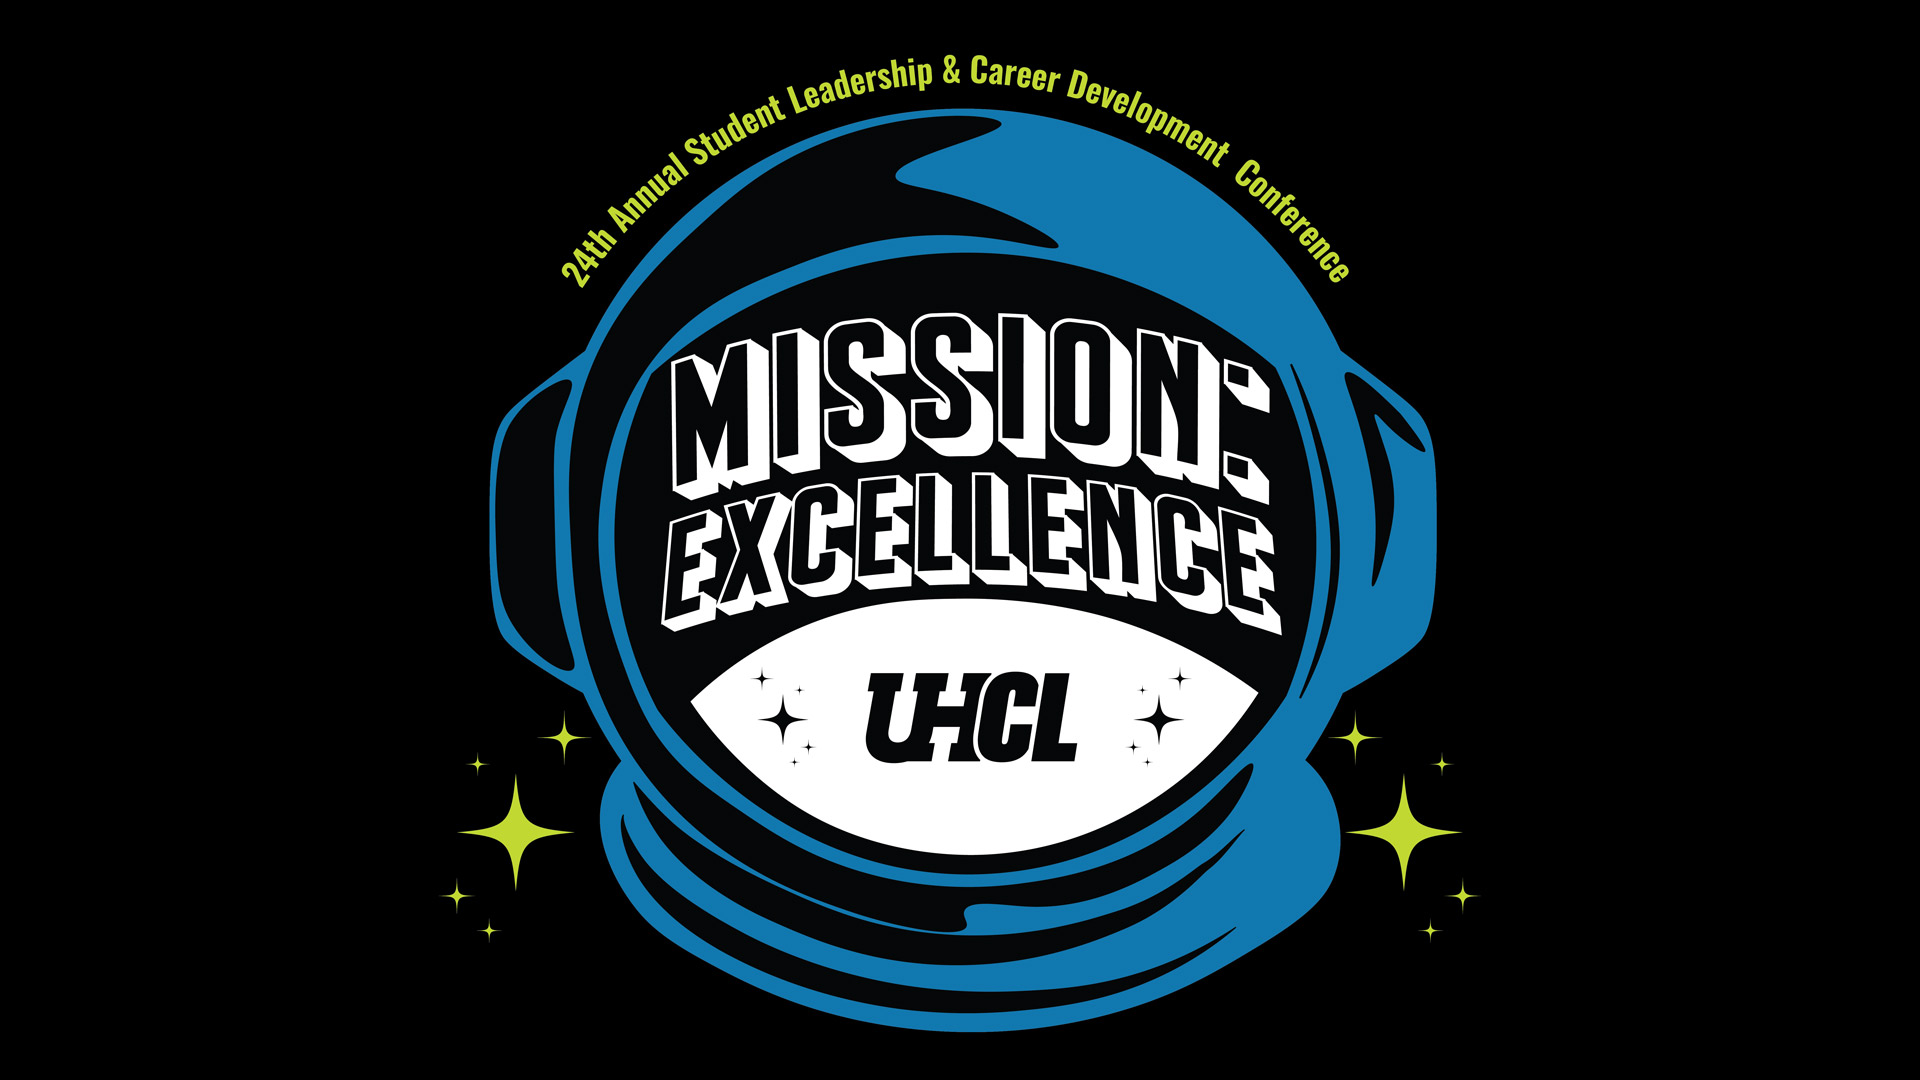 GRAPHIC: The "Mission: Excellence" Student Leadership and Development Conference will take place at UHCL Nov. 13. Graphic courtesy of Student Involvement and Leadership.